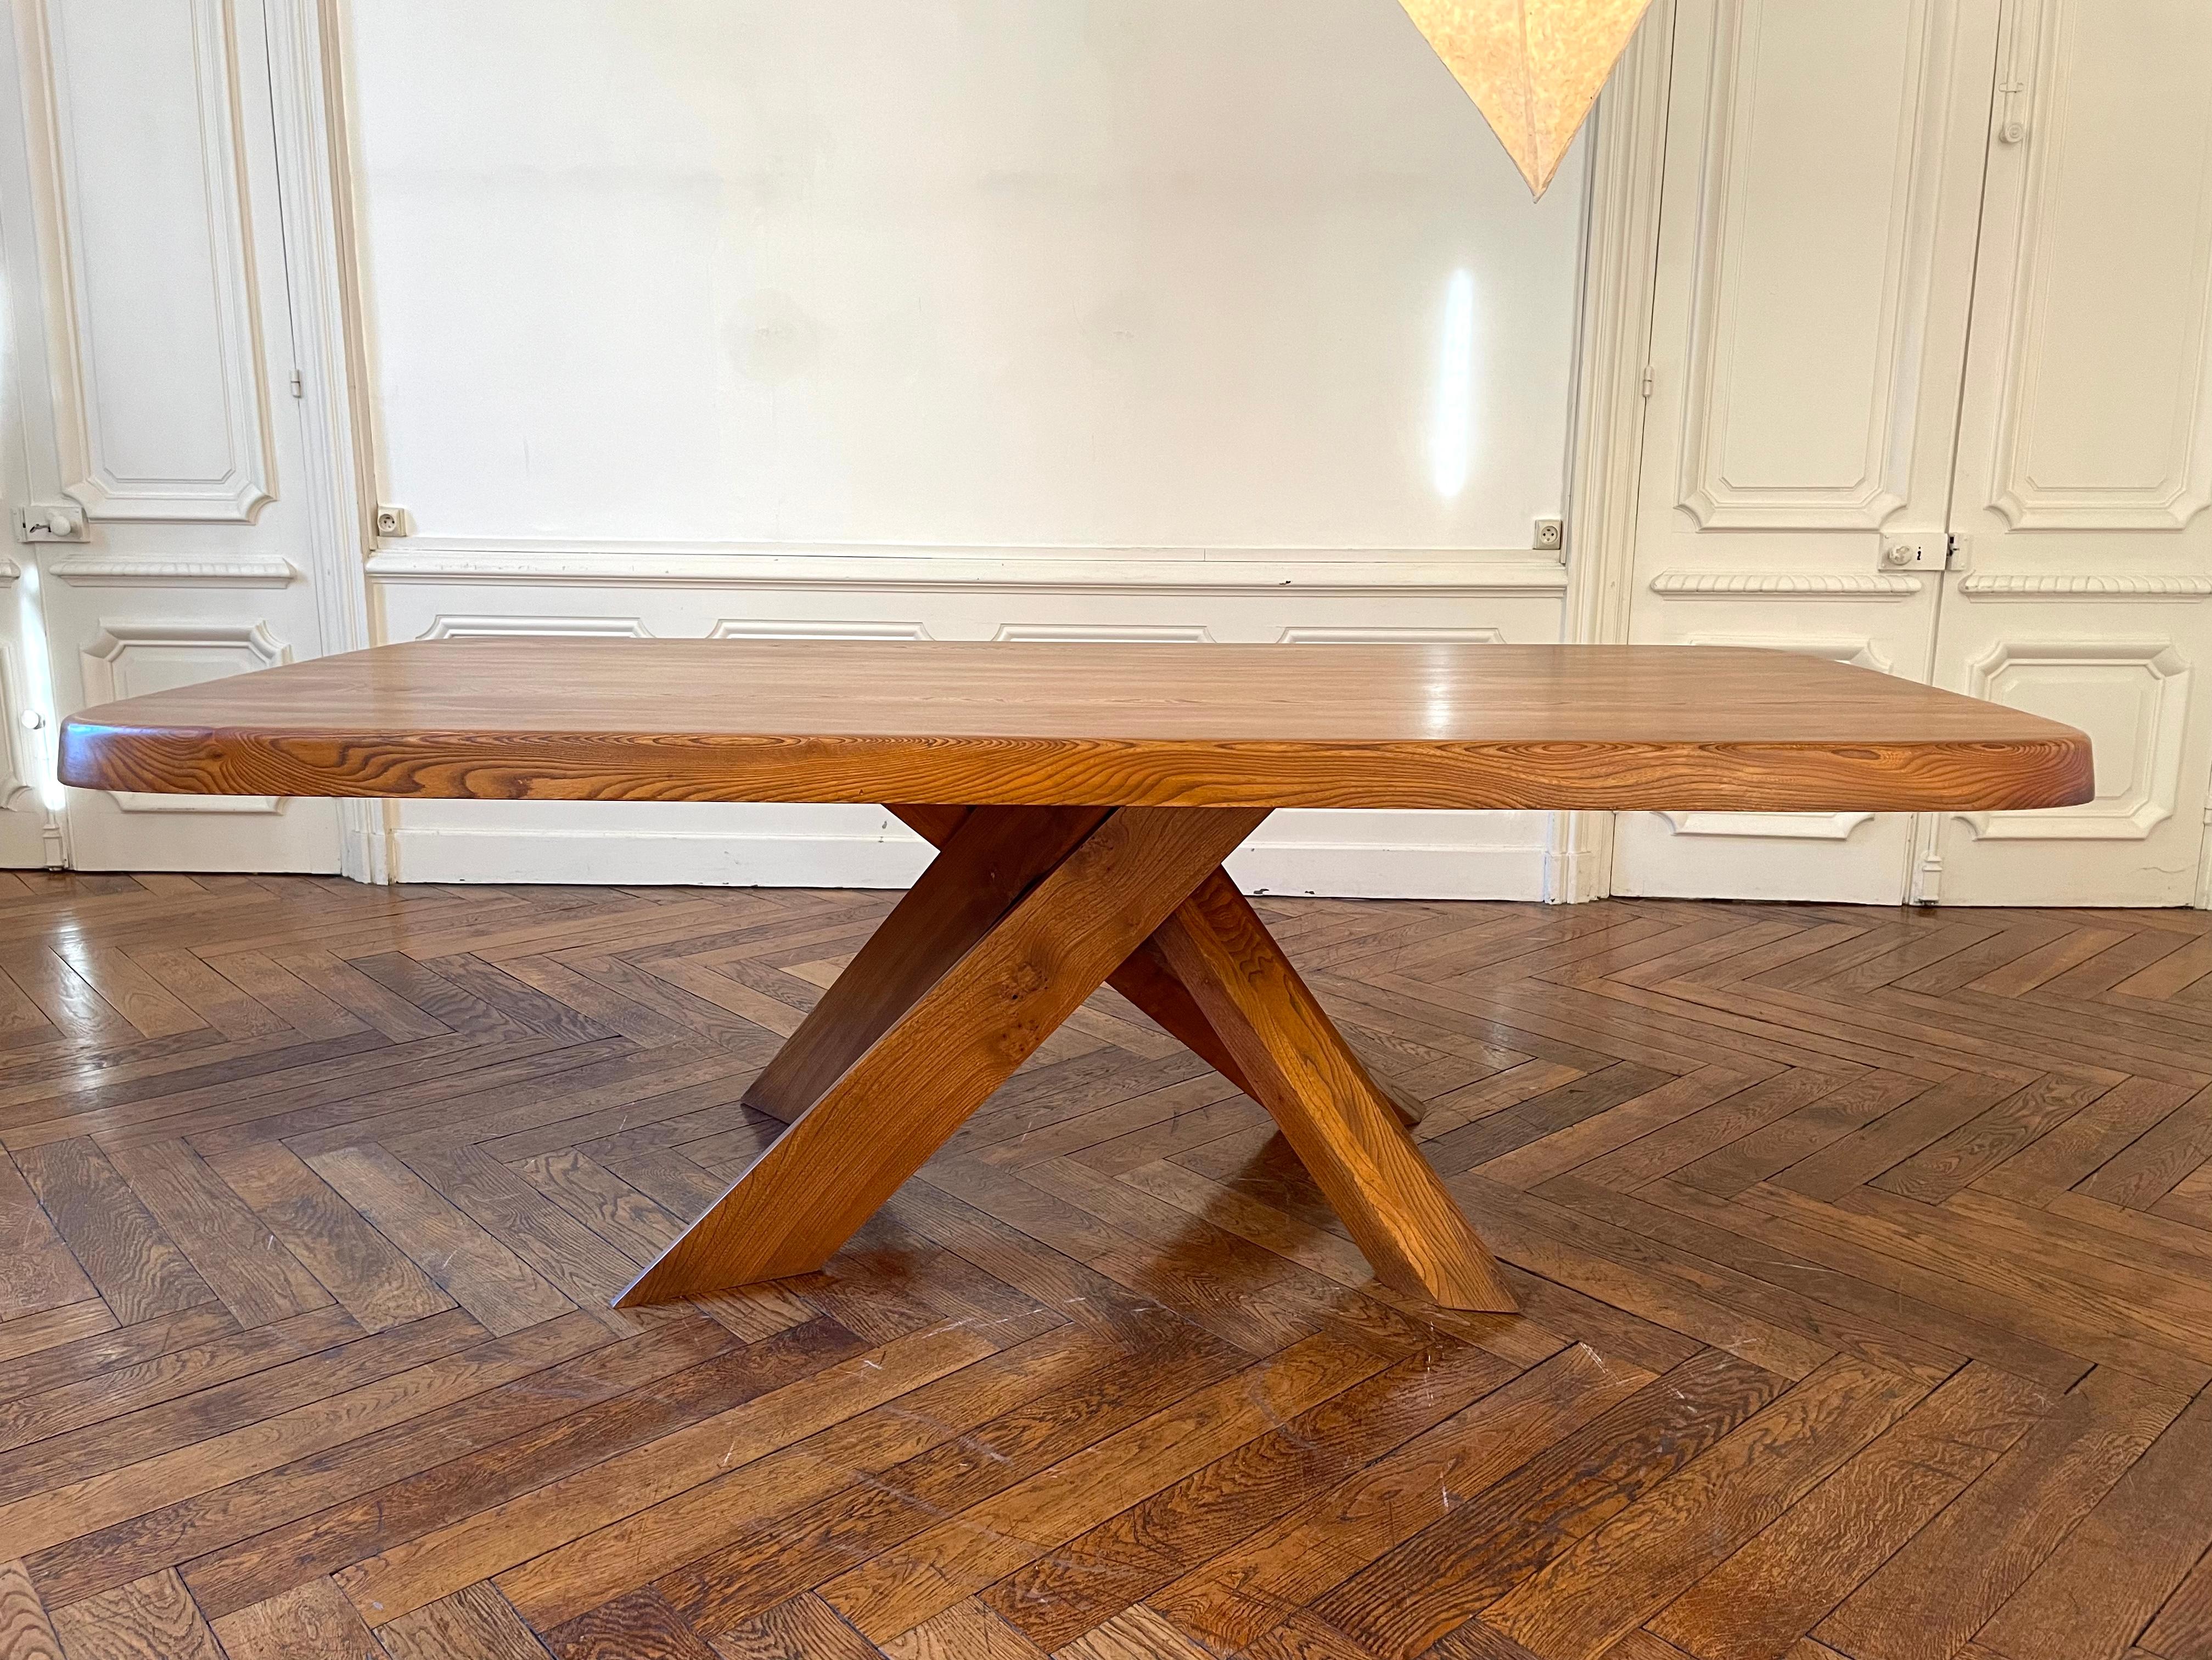 Table T 35 D by Pierre Chapo in French elm (non-existing wood) from 1978. an original Chapo invoice will be provided .Curved rectangular top. A central base has 4 branches. A table perfectly suited to the dining area, the legs do not interfere with